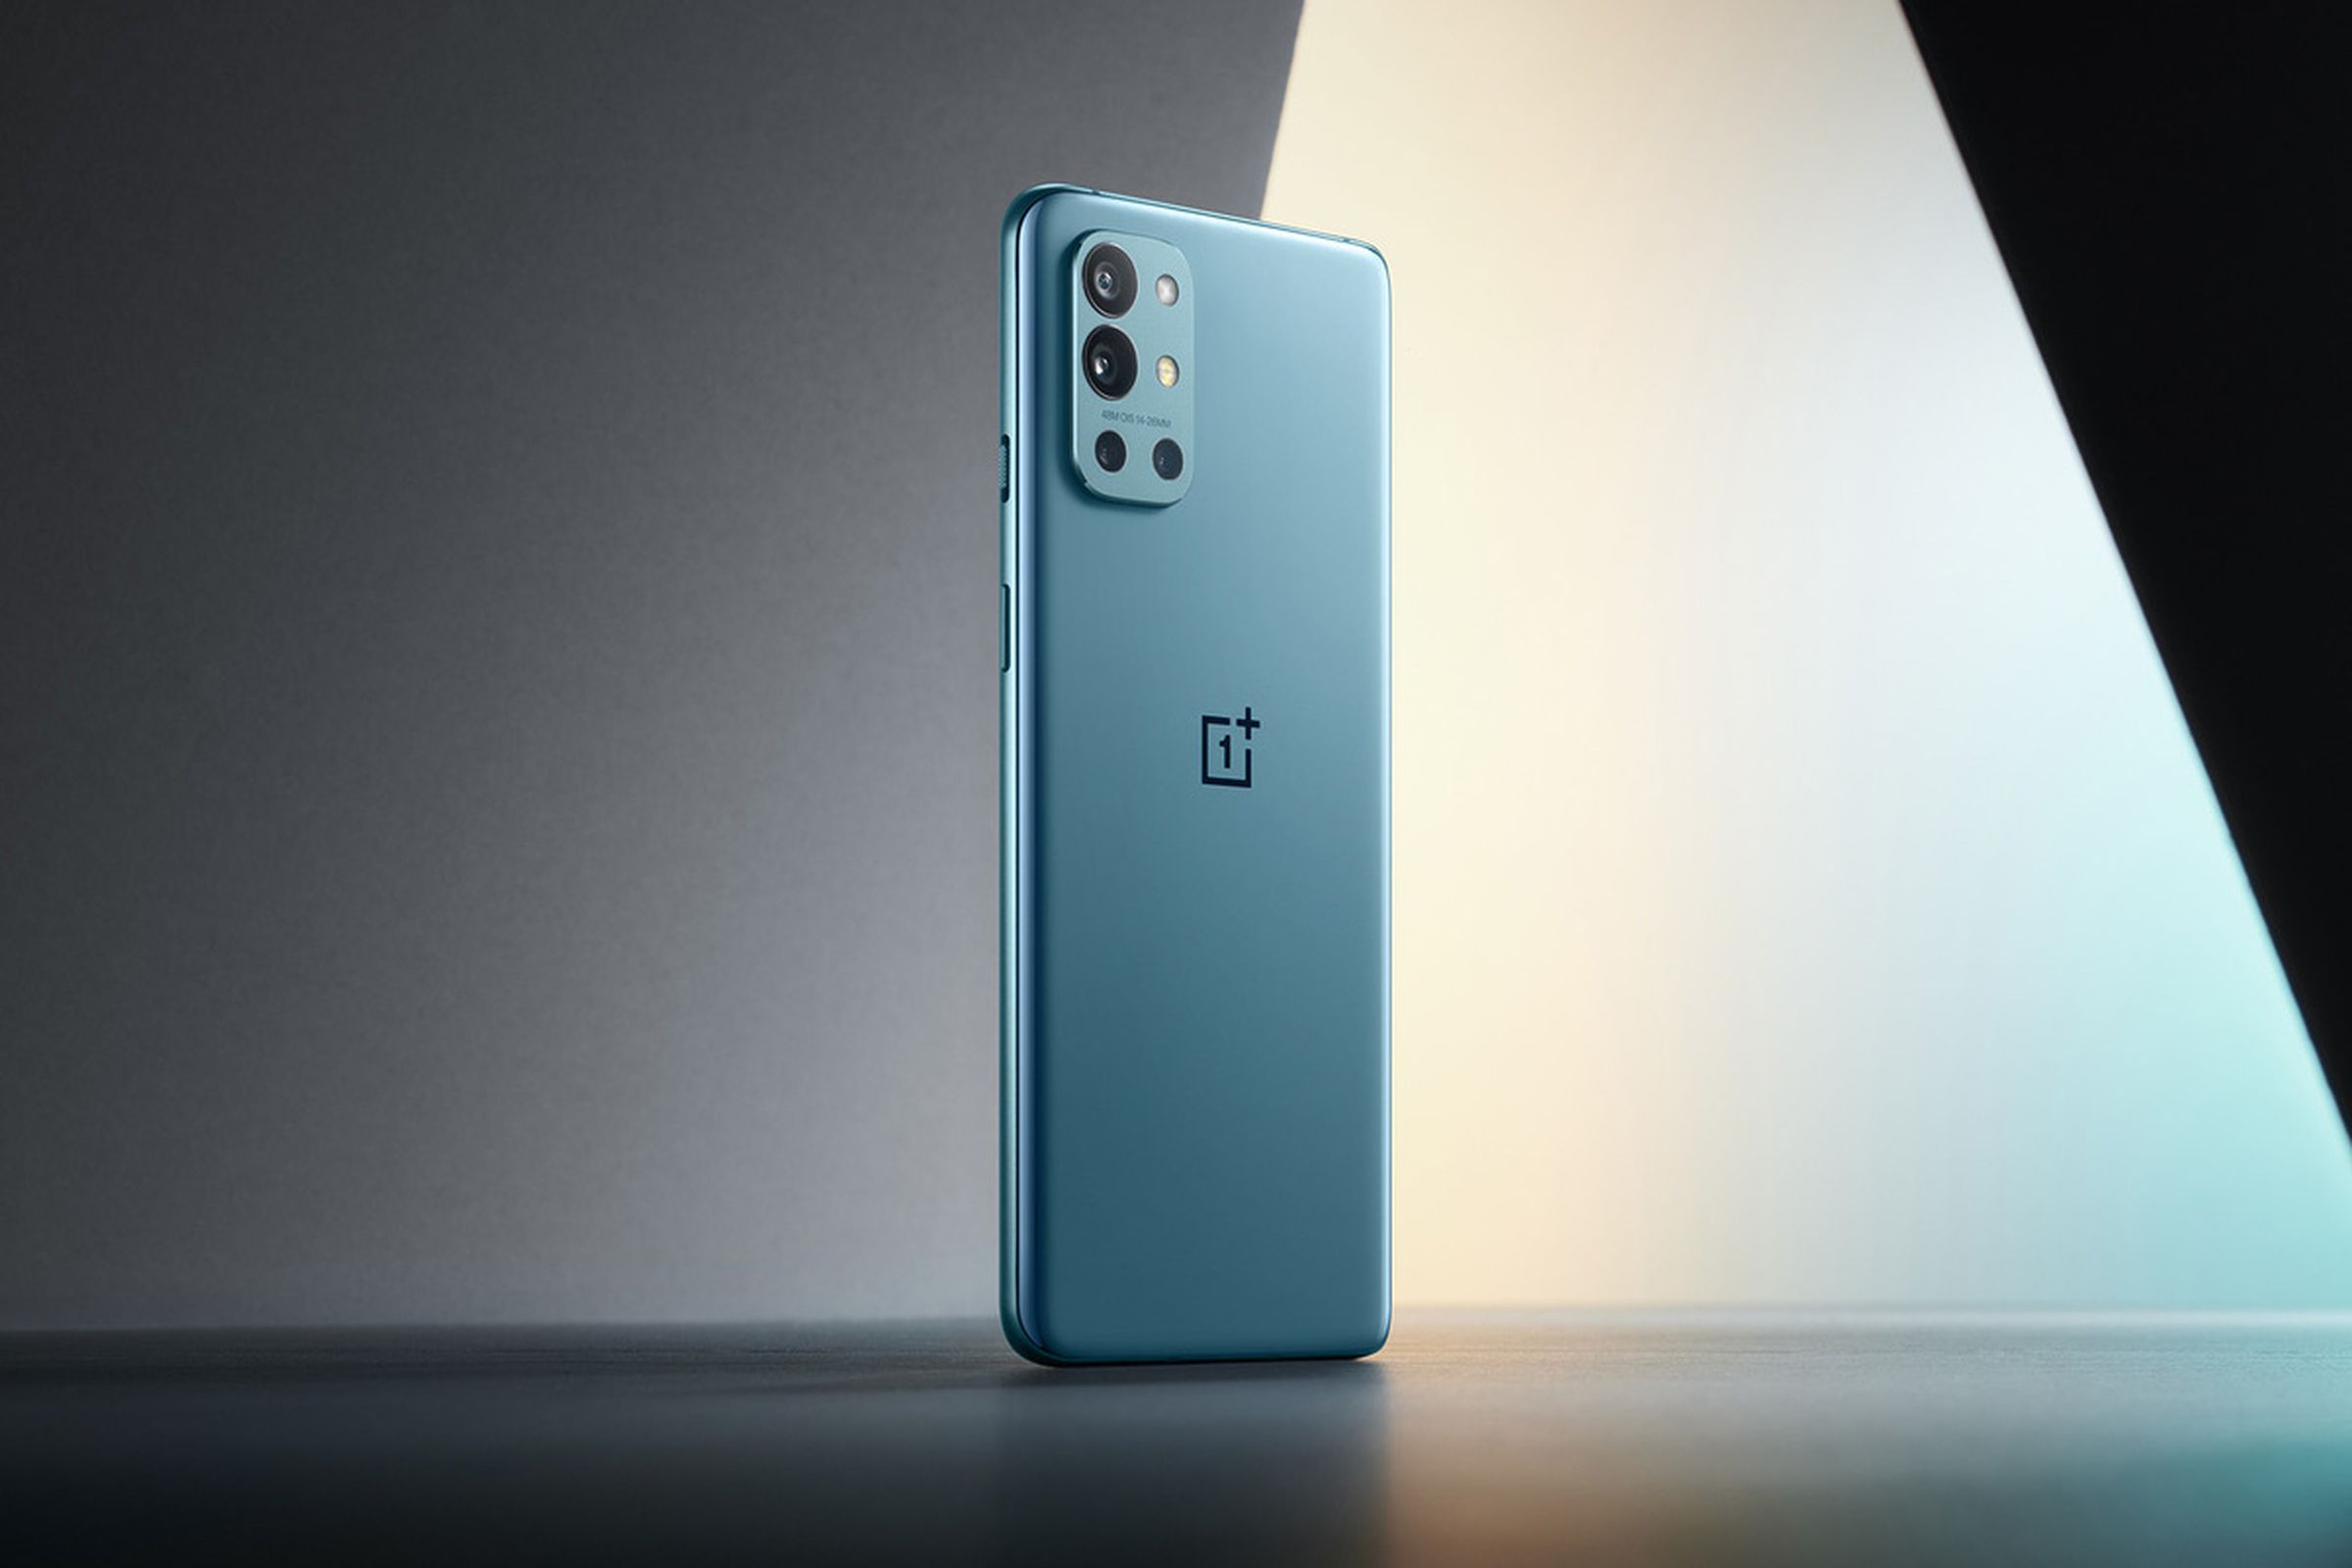 The OnePlus 9R will be sold in black or blue color options.